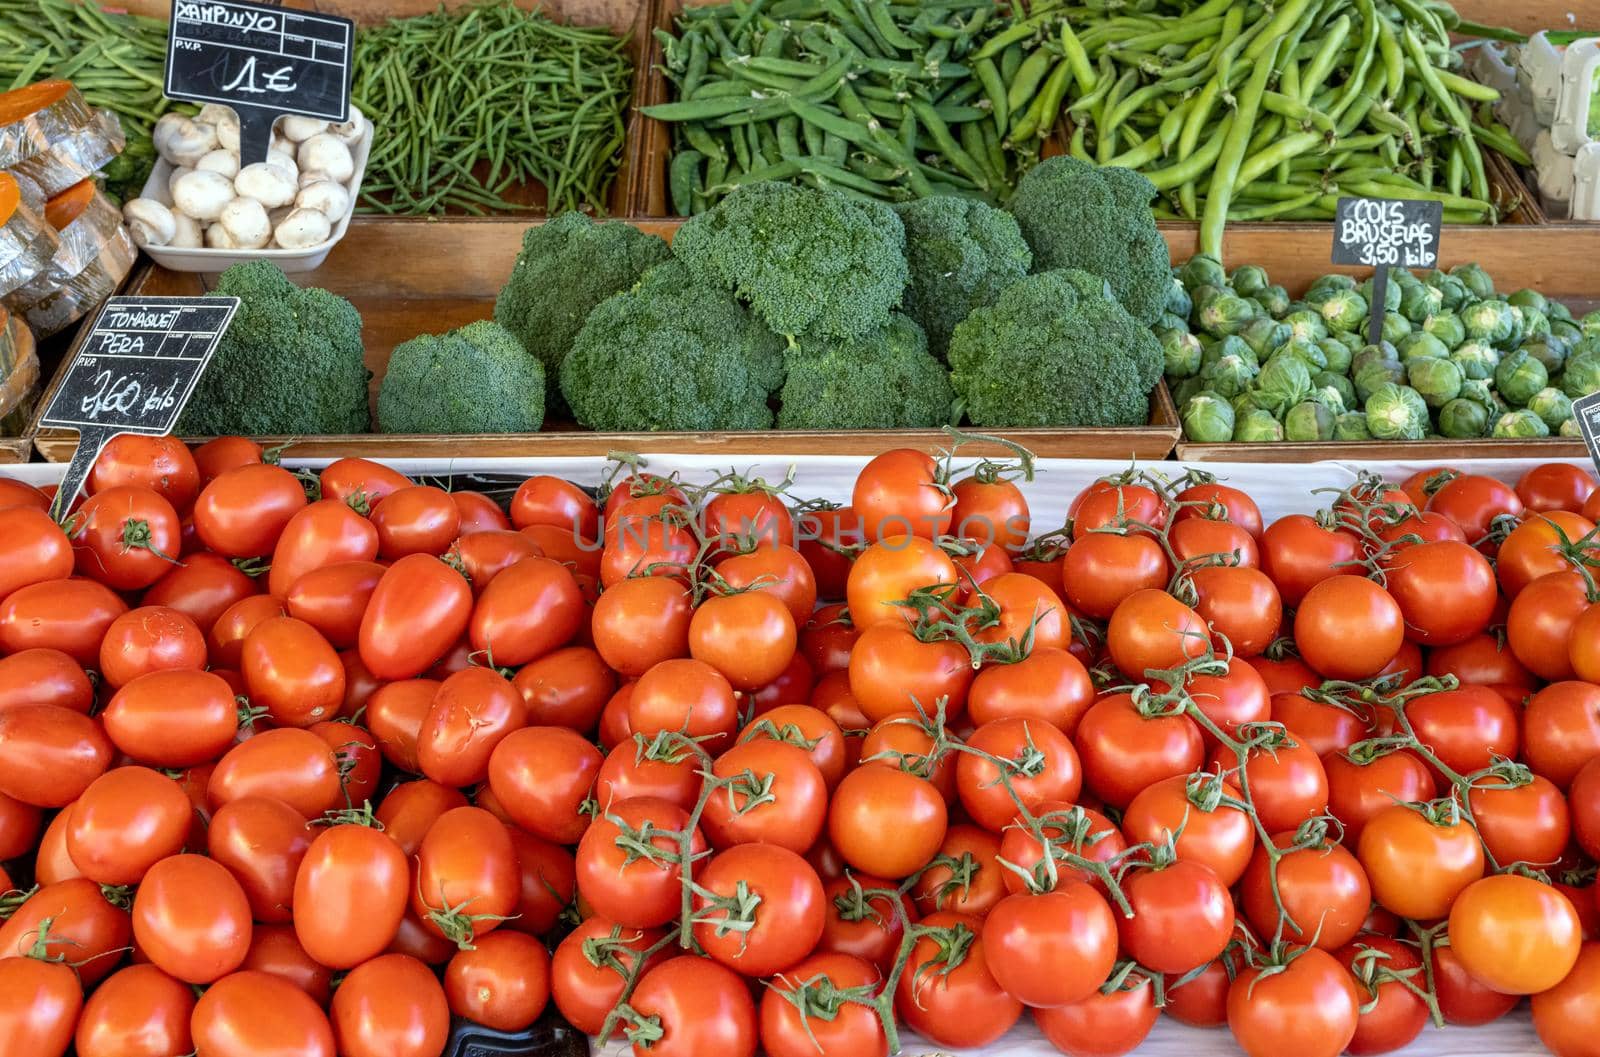 Tomatoes, broccoli and green peas for sale at a market